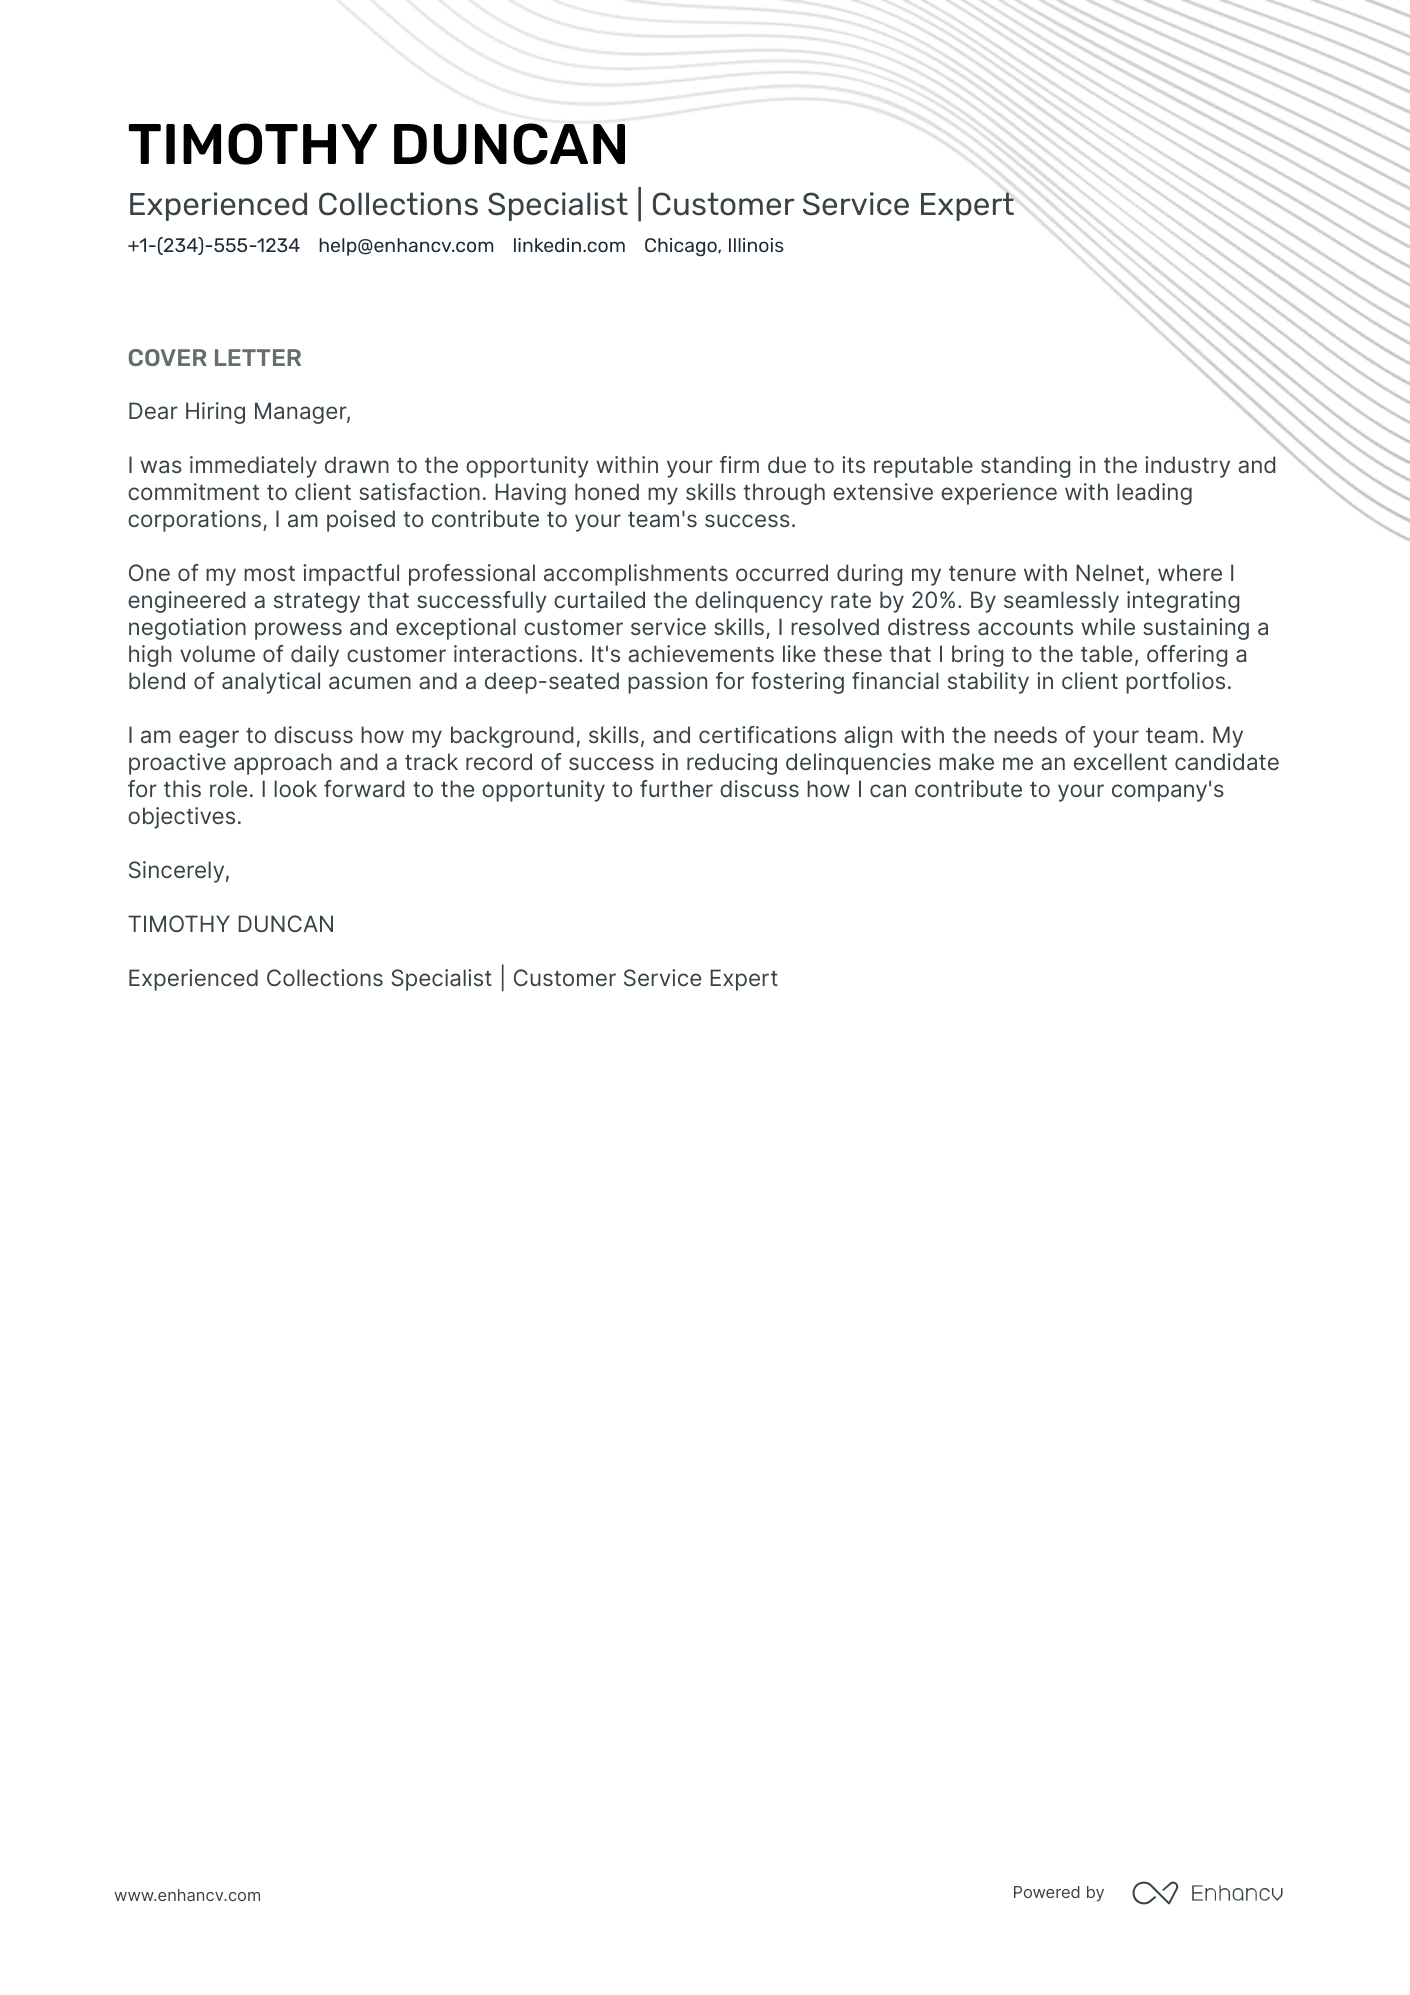 Collections Specialist cover letter